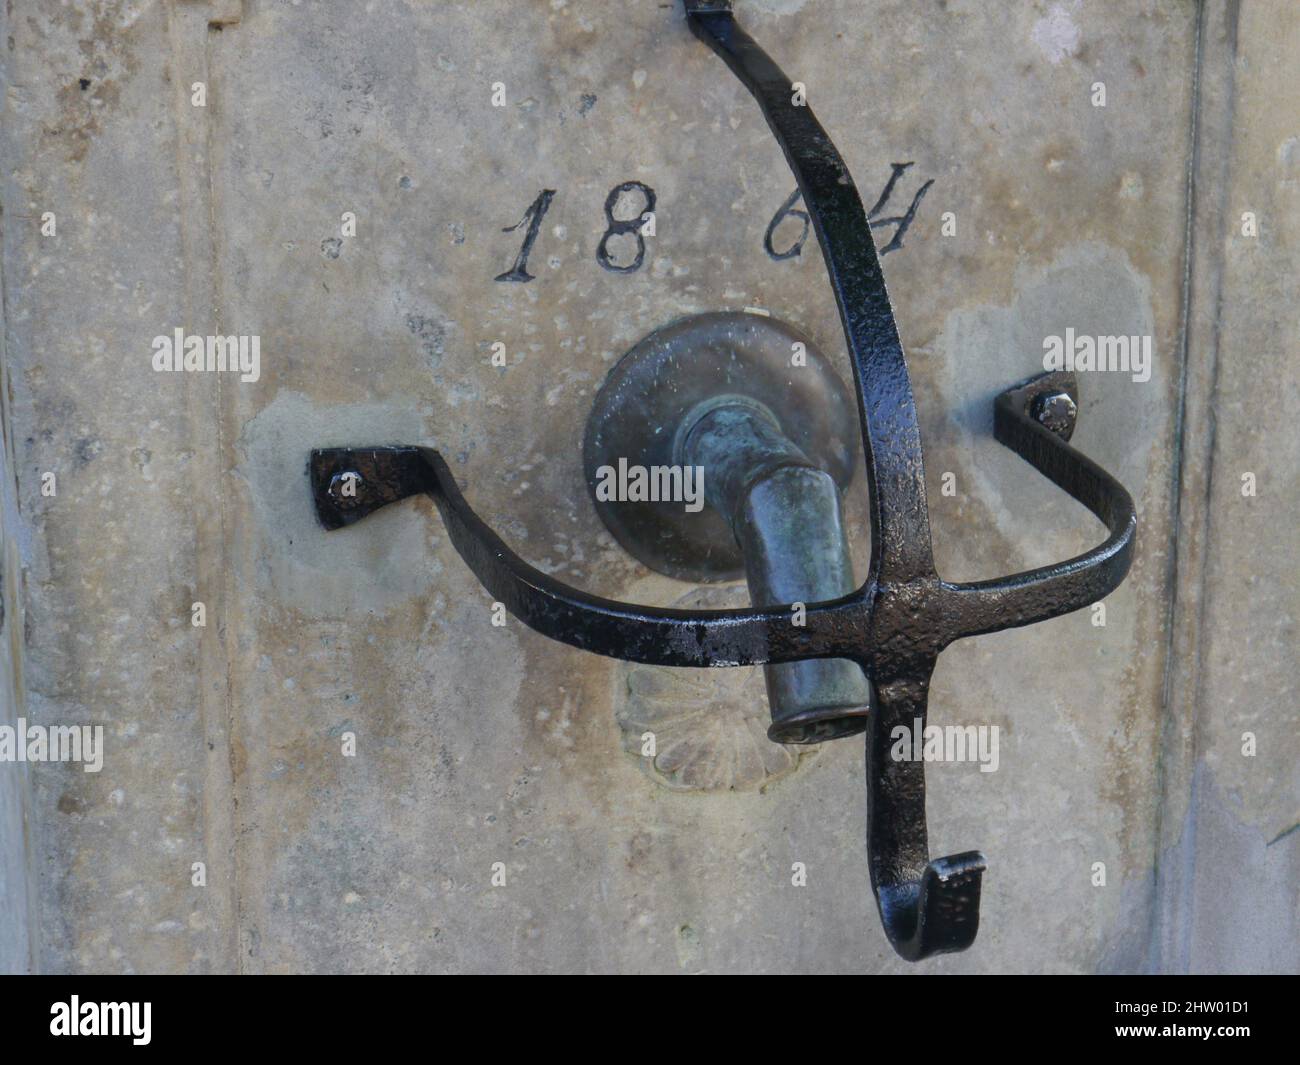 Black wrought iron protective grille on the tap of a well. Bronze water fitting in blurred background. Numbers indicate the year of construction 1864. Stock Photo